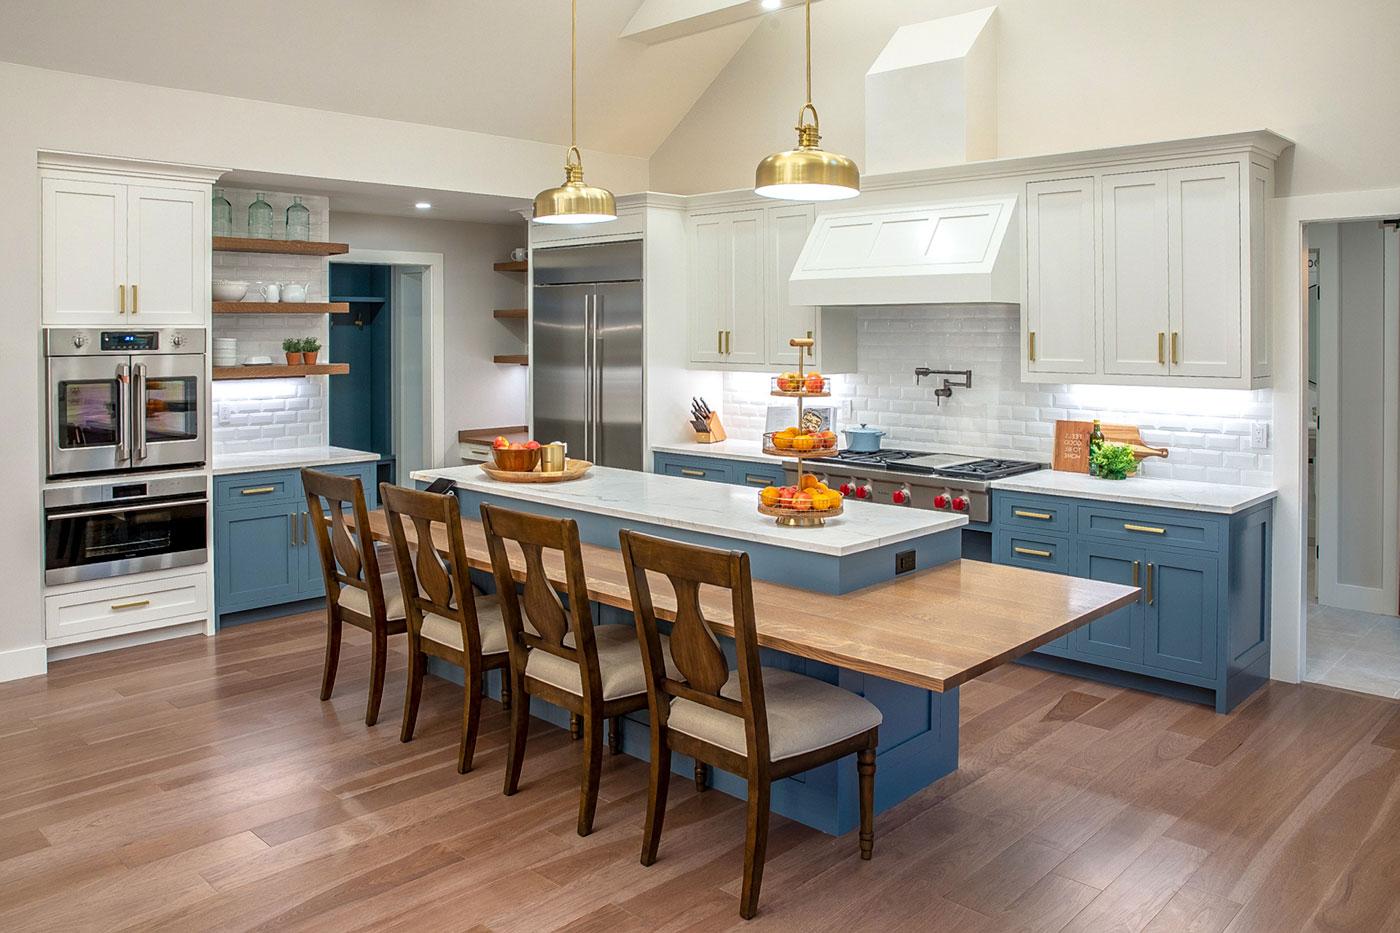 Custom kitchen of a specially adapted smart home, constructed through the R.I.S.E. program at the Gary Sinise Foundation